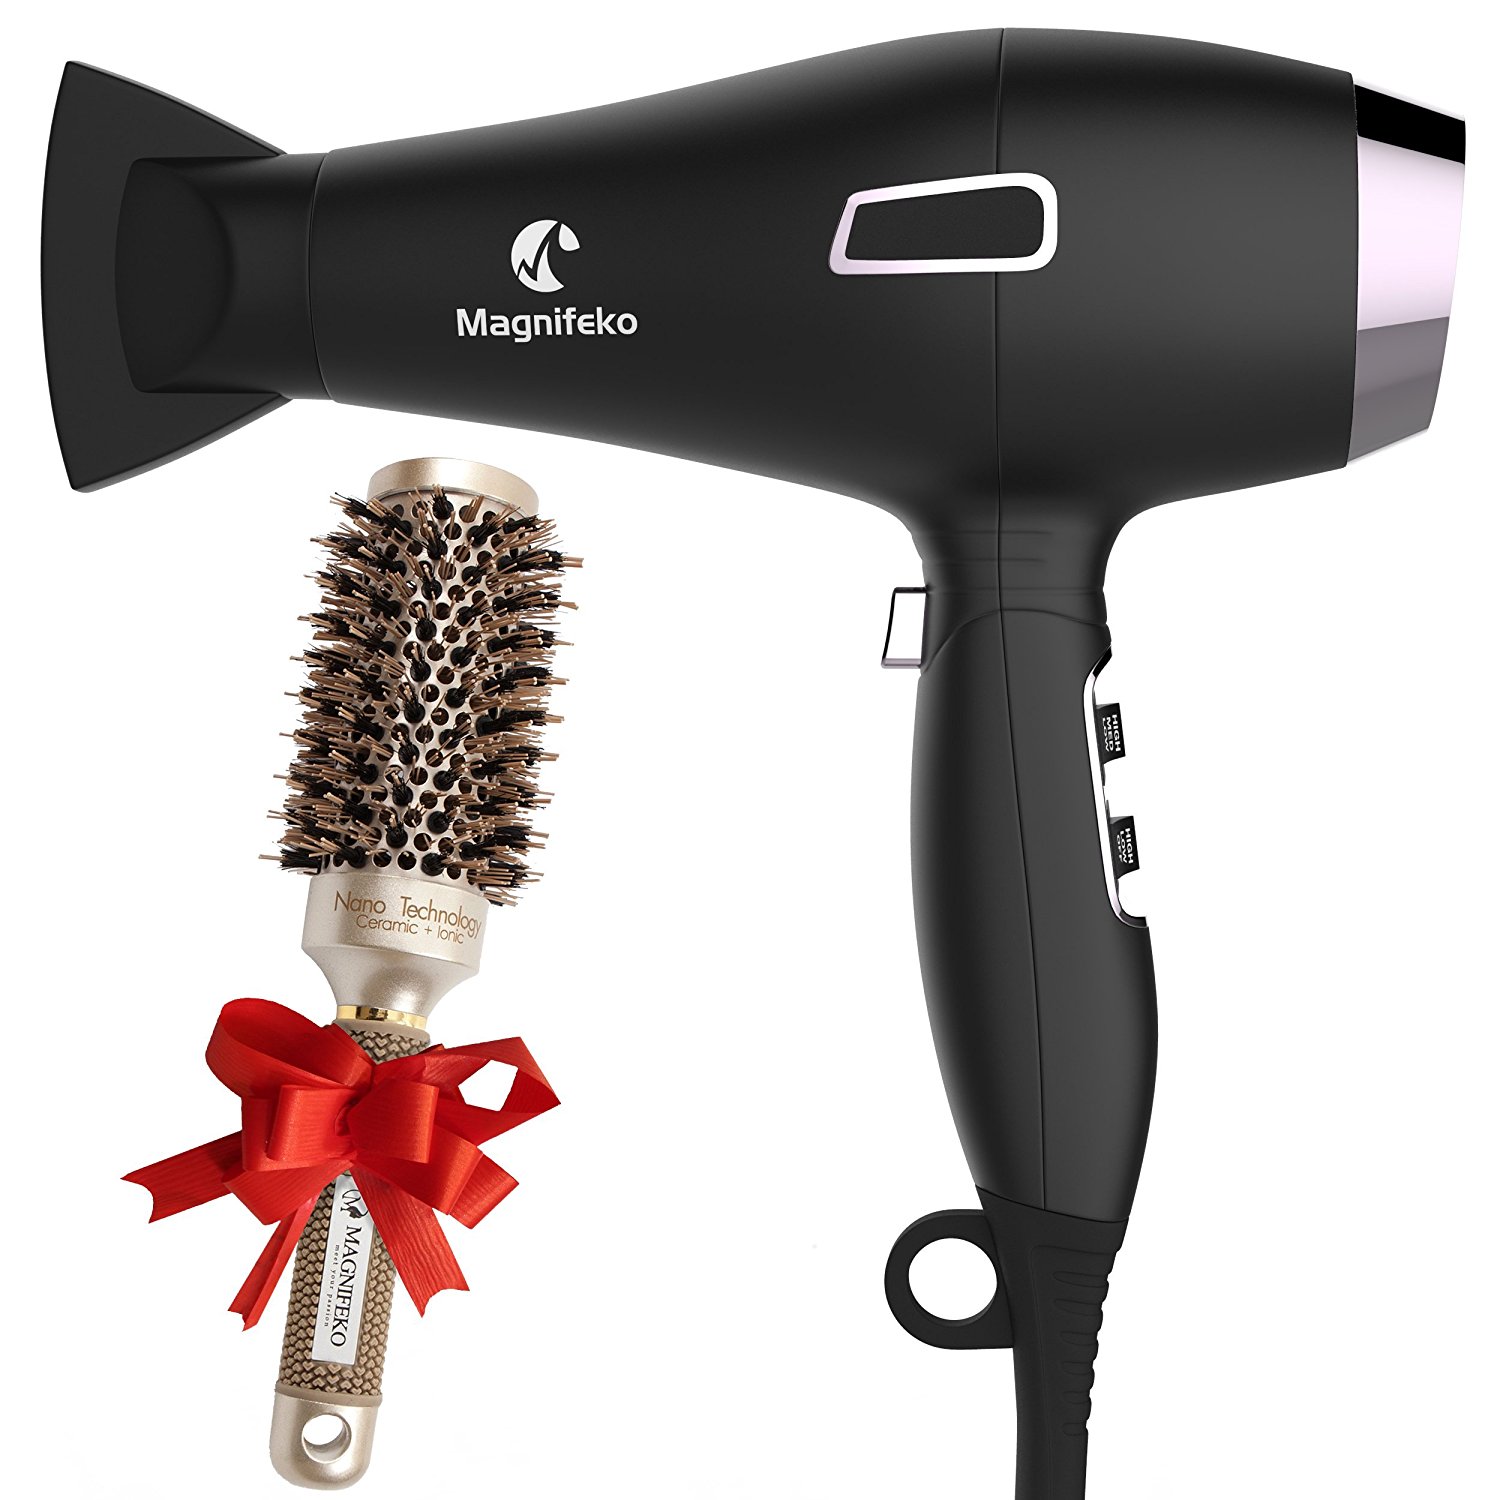 Ionic Hair Dryer with FREE Ceramic Blowdrying Brush | Anti-Frizz blow dryer with Extra-Fast 1875W Motor and Concentrator Nozzle | Professional Hairdryer for Men and Women